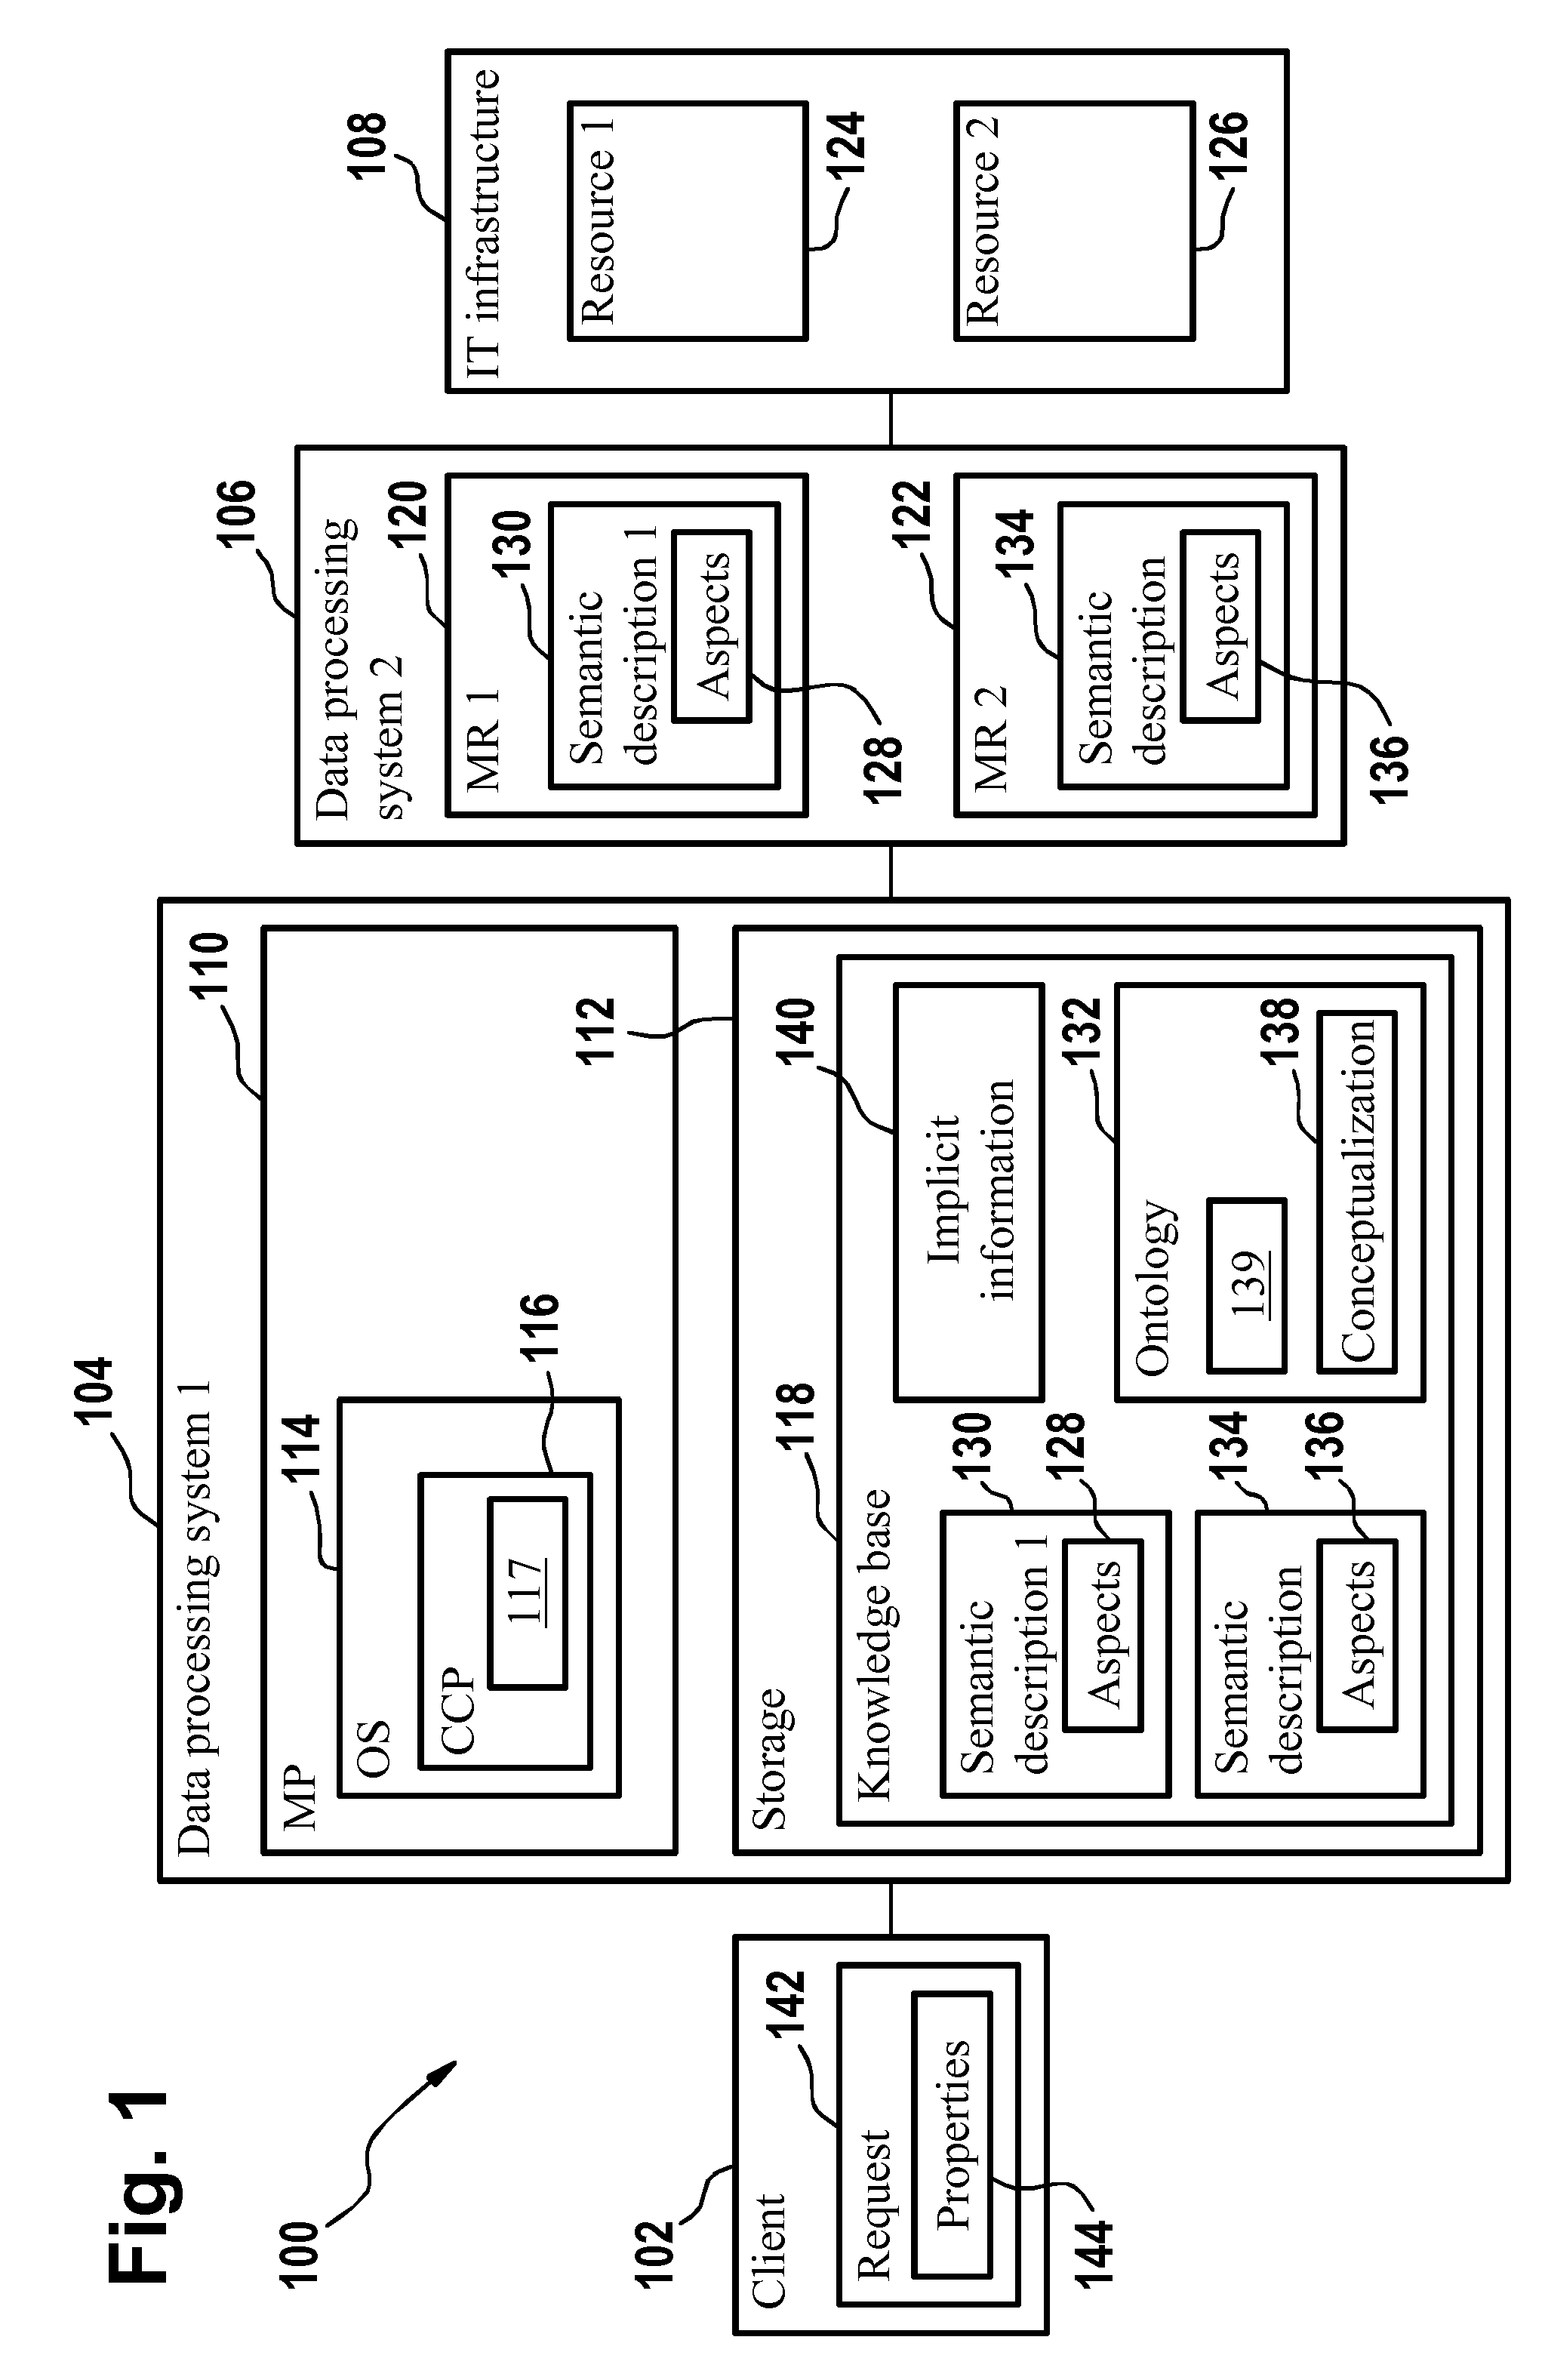 Method and System for an Application Domain